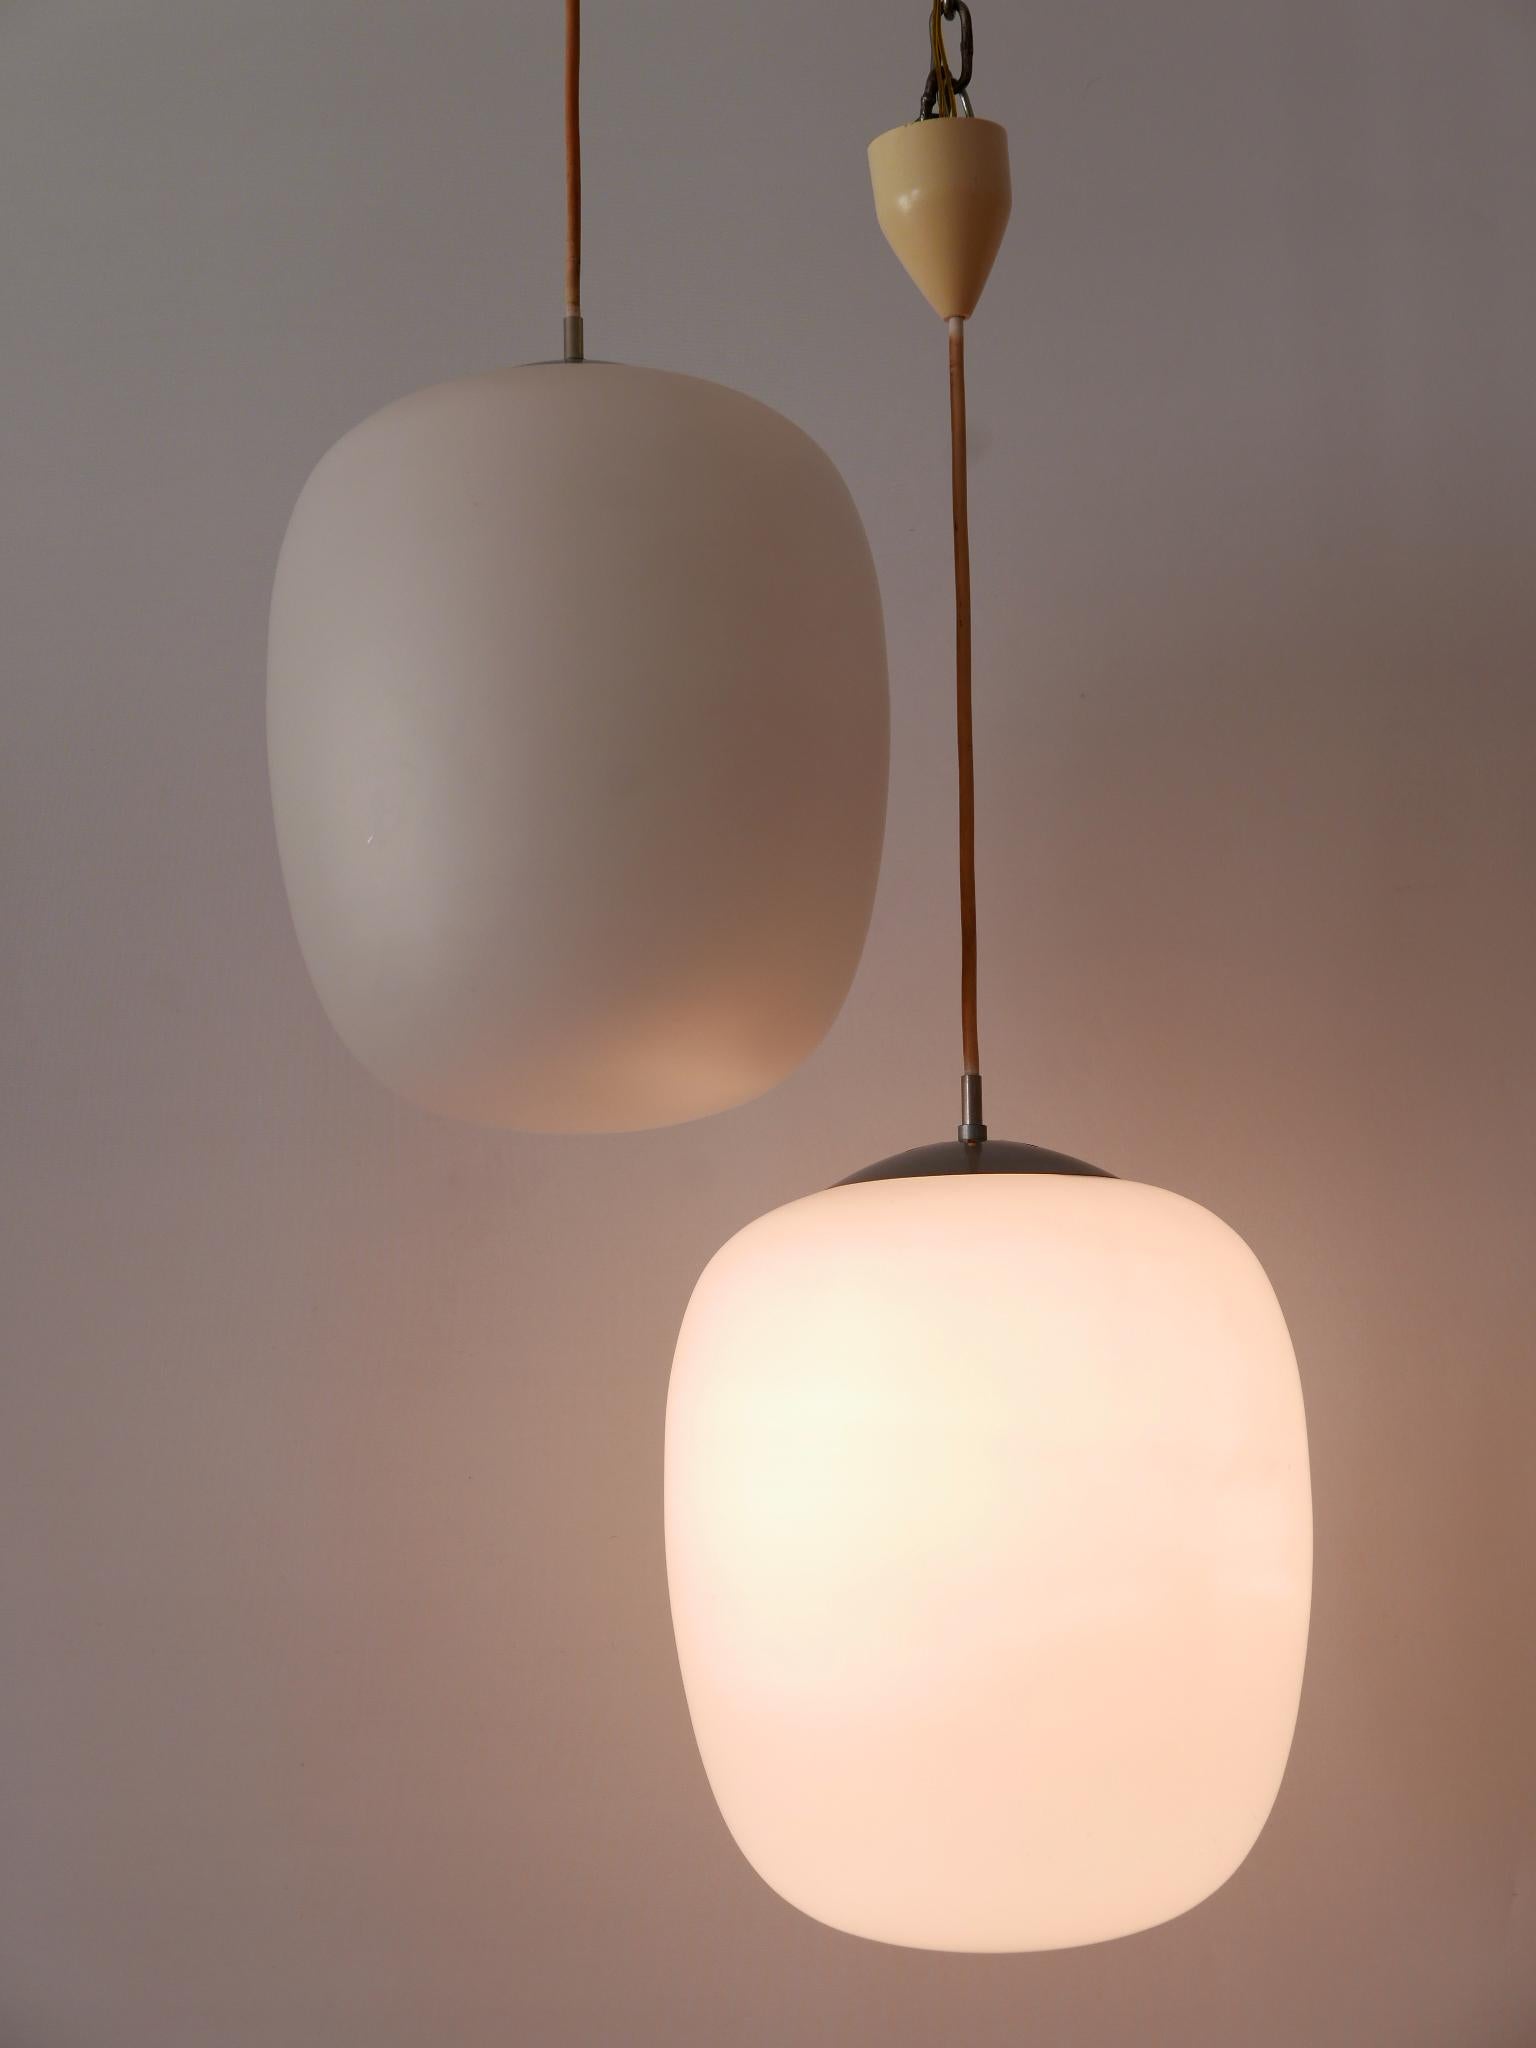 Elegant Mid-Century Modern pendant lamp or hanging light. Model 'Düren'. Designed by Wilhelm Wagenfeld for Peill & Putzler, Germany, 1952. Manufactured in 1950s.

Executed in opaline glass , the pendant lamp needs 1 x E27 / E26 Edison screw fit